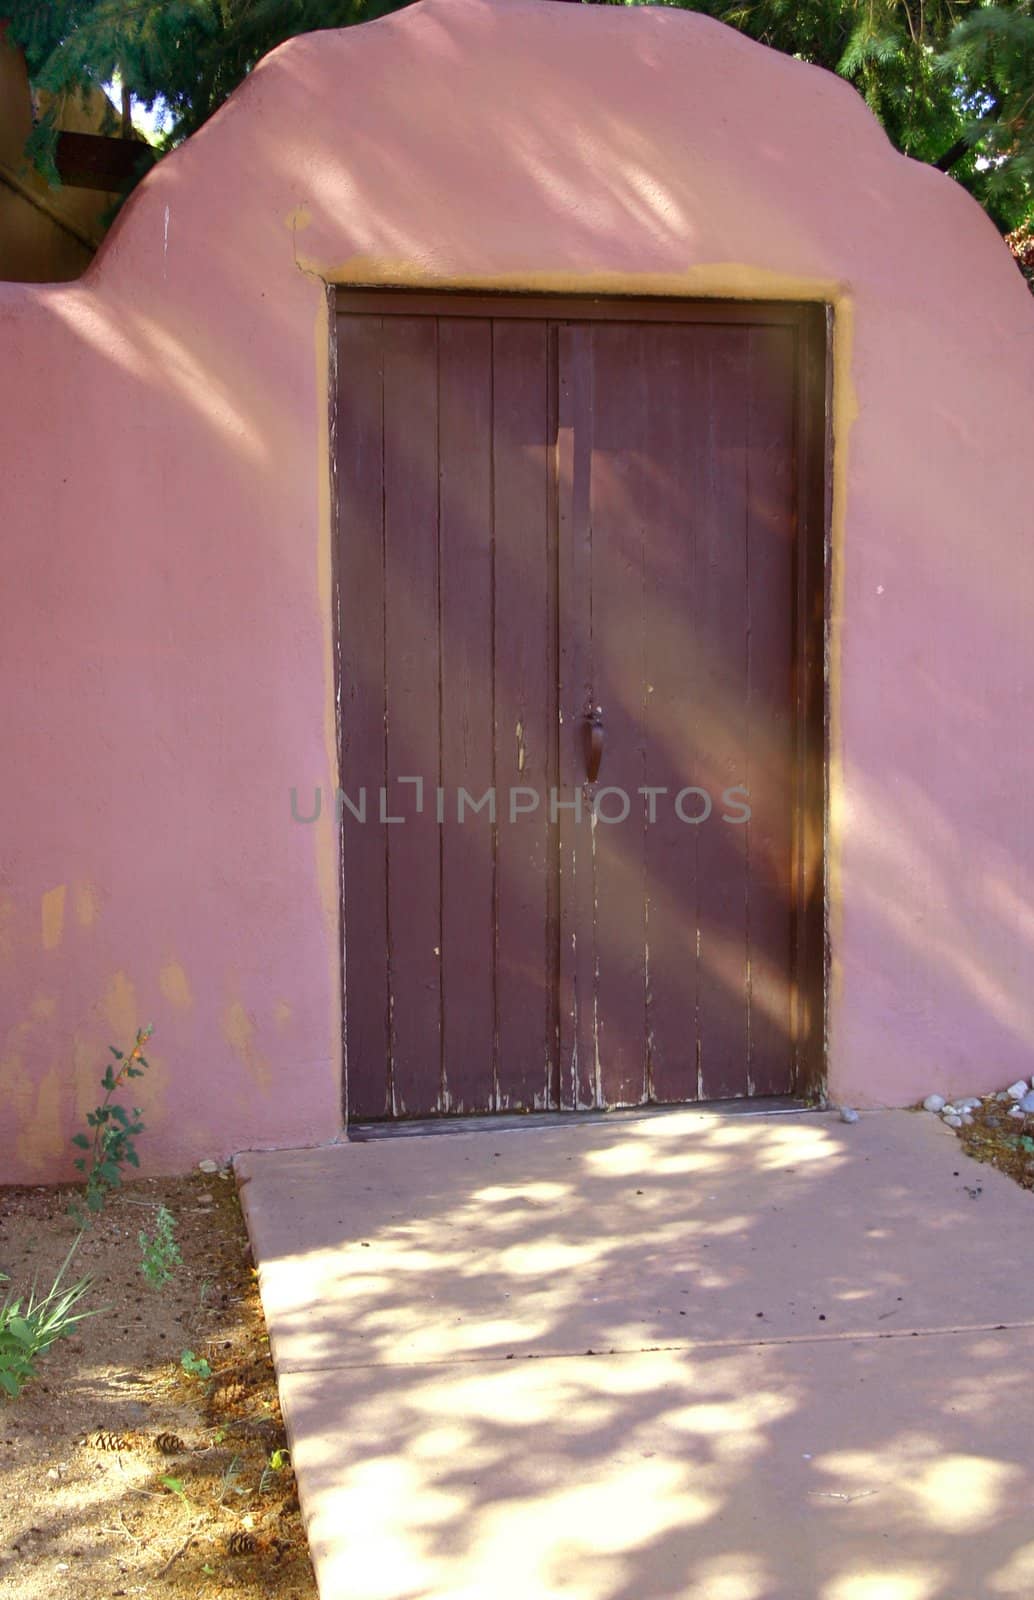 A beautiful southwestern doorway enters into a shady courtyard which offers respite from the sunshine and heat of the desert.